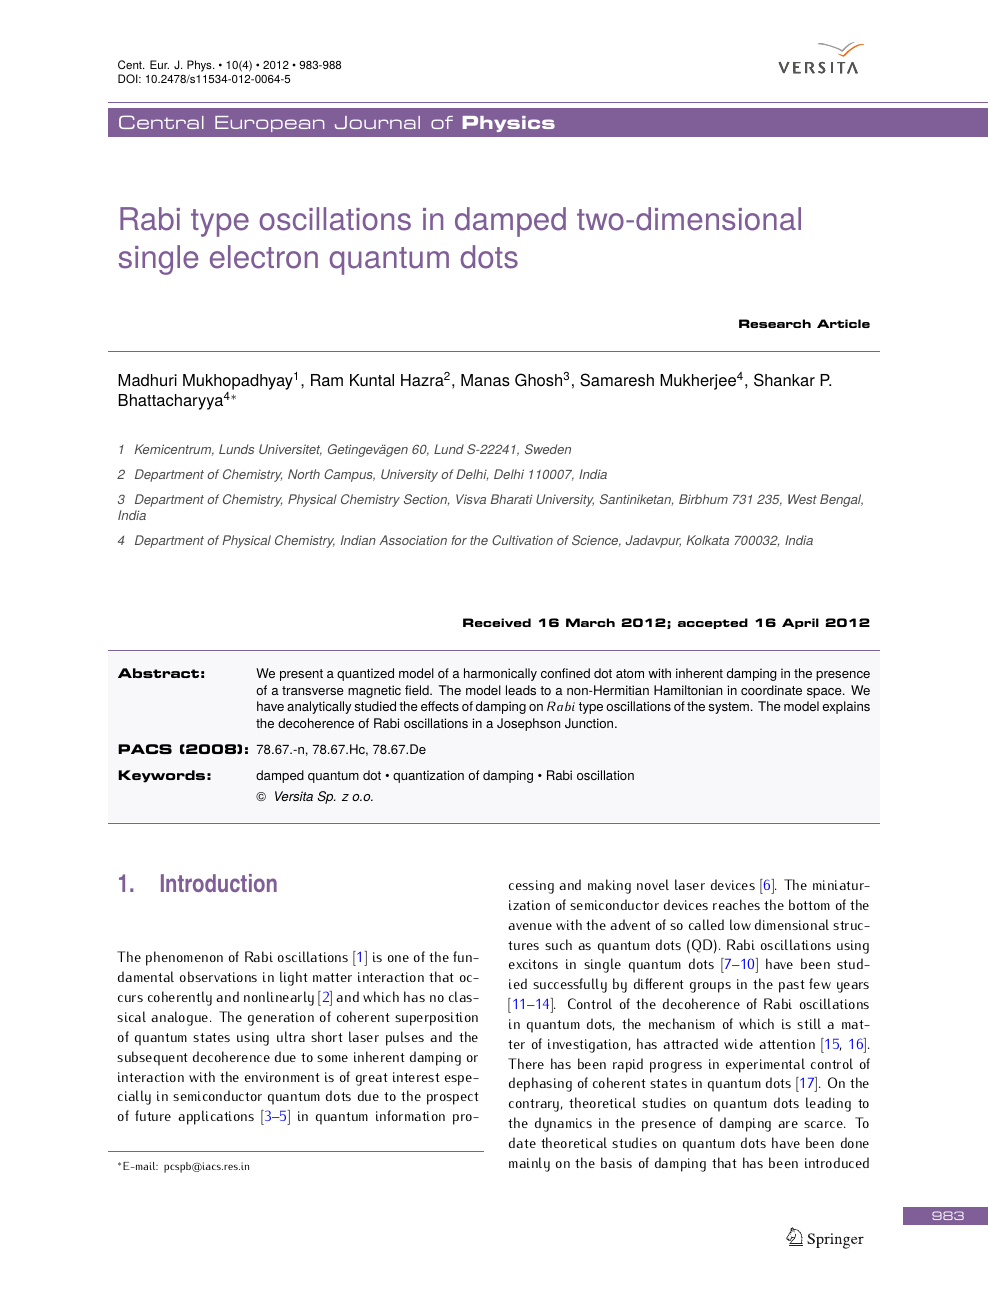 Rabi Type Oscillations In Damped Two Dimensional Single Electron Quantum Dots Topic Of Research Paper In Physical Sciences Download Scholarly Article Pdf And Read For Free On Cyberleninka Open Science Hub